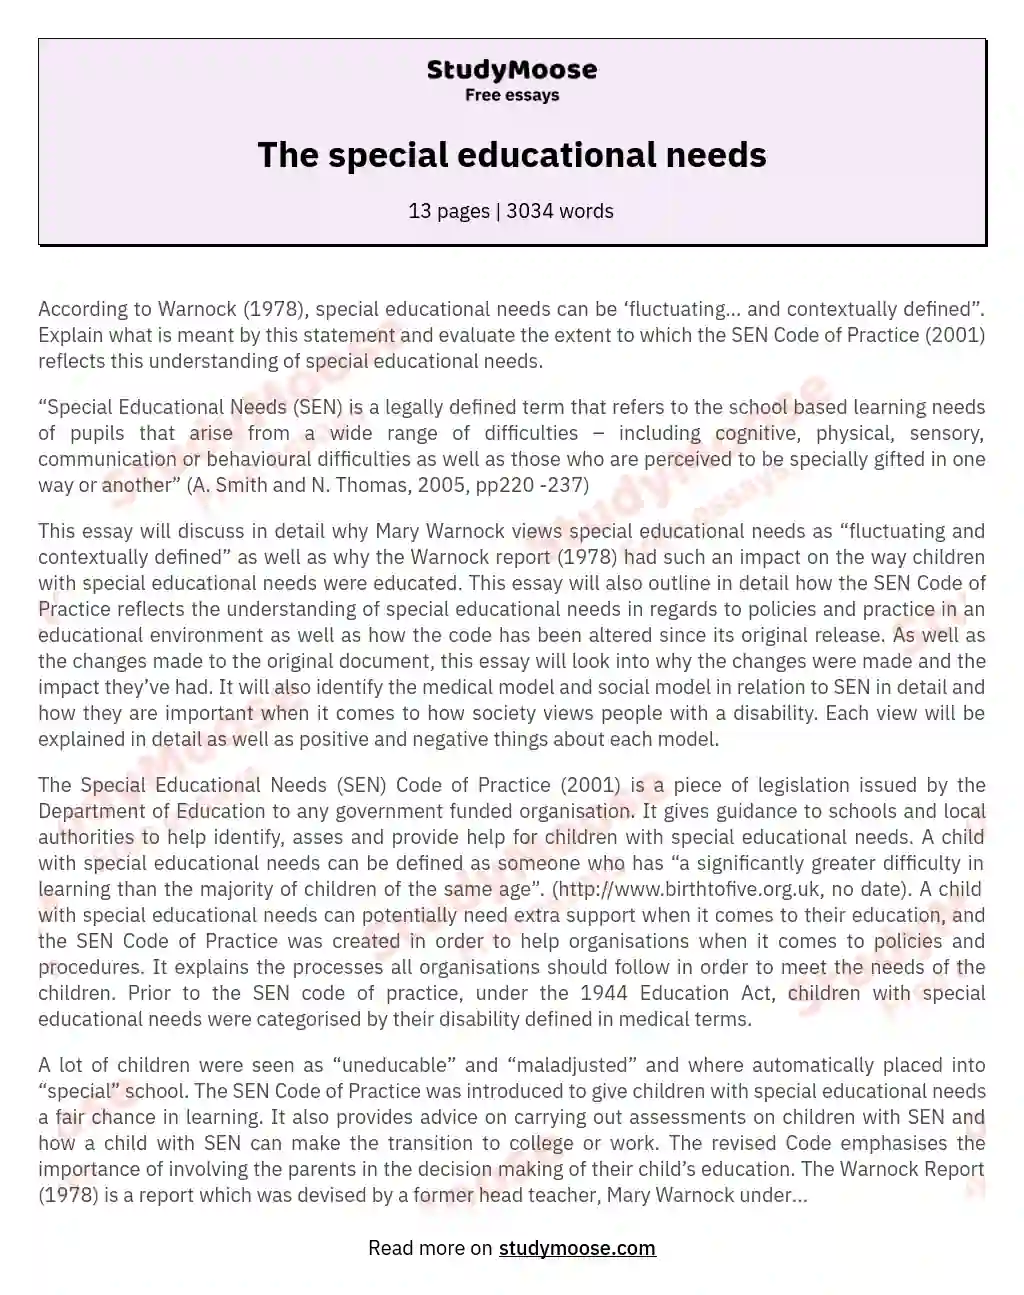 The special educational needs essay